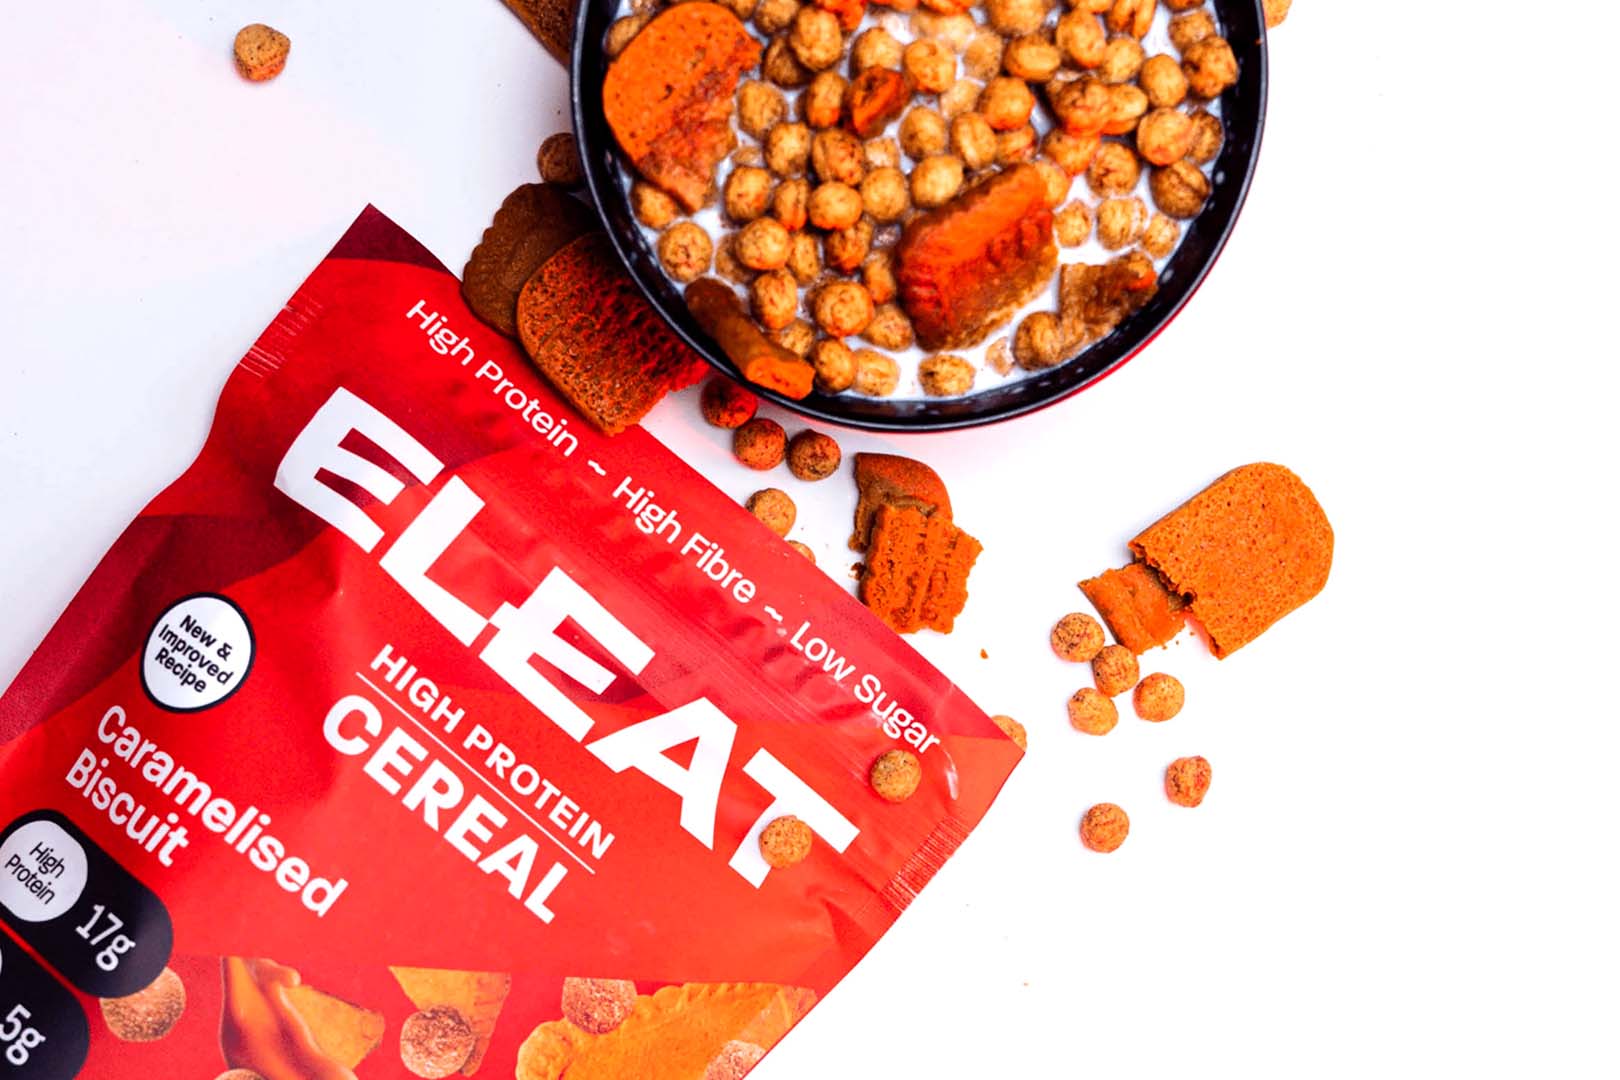 Eleat Caramelized Biscuit Protein Cereal